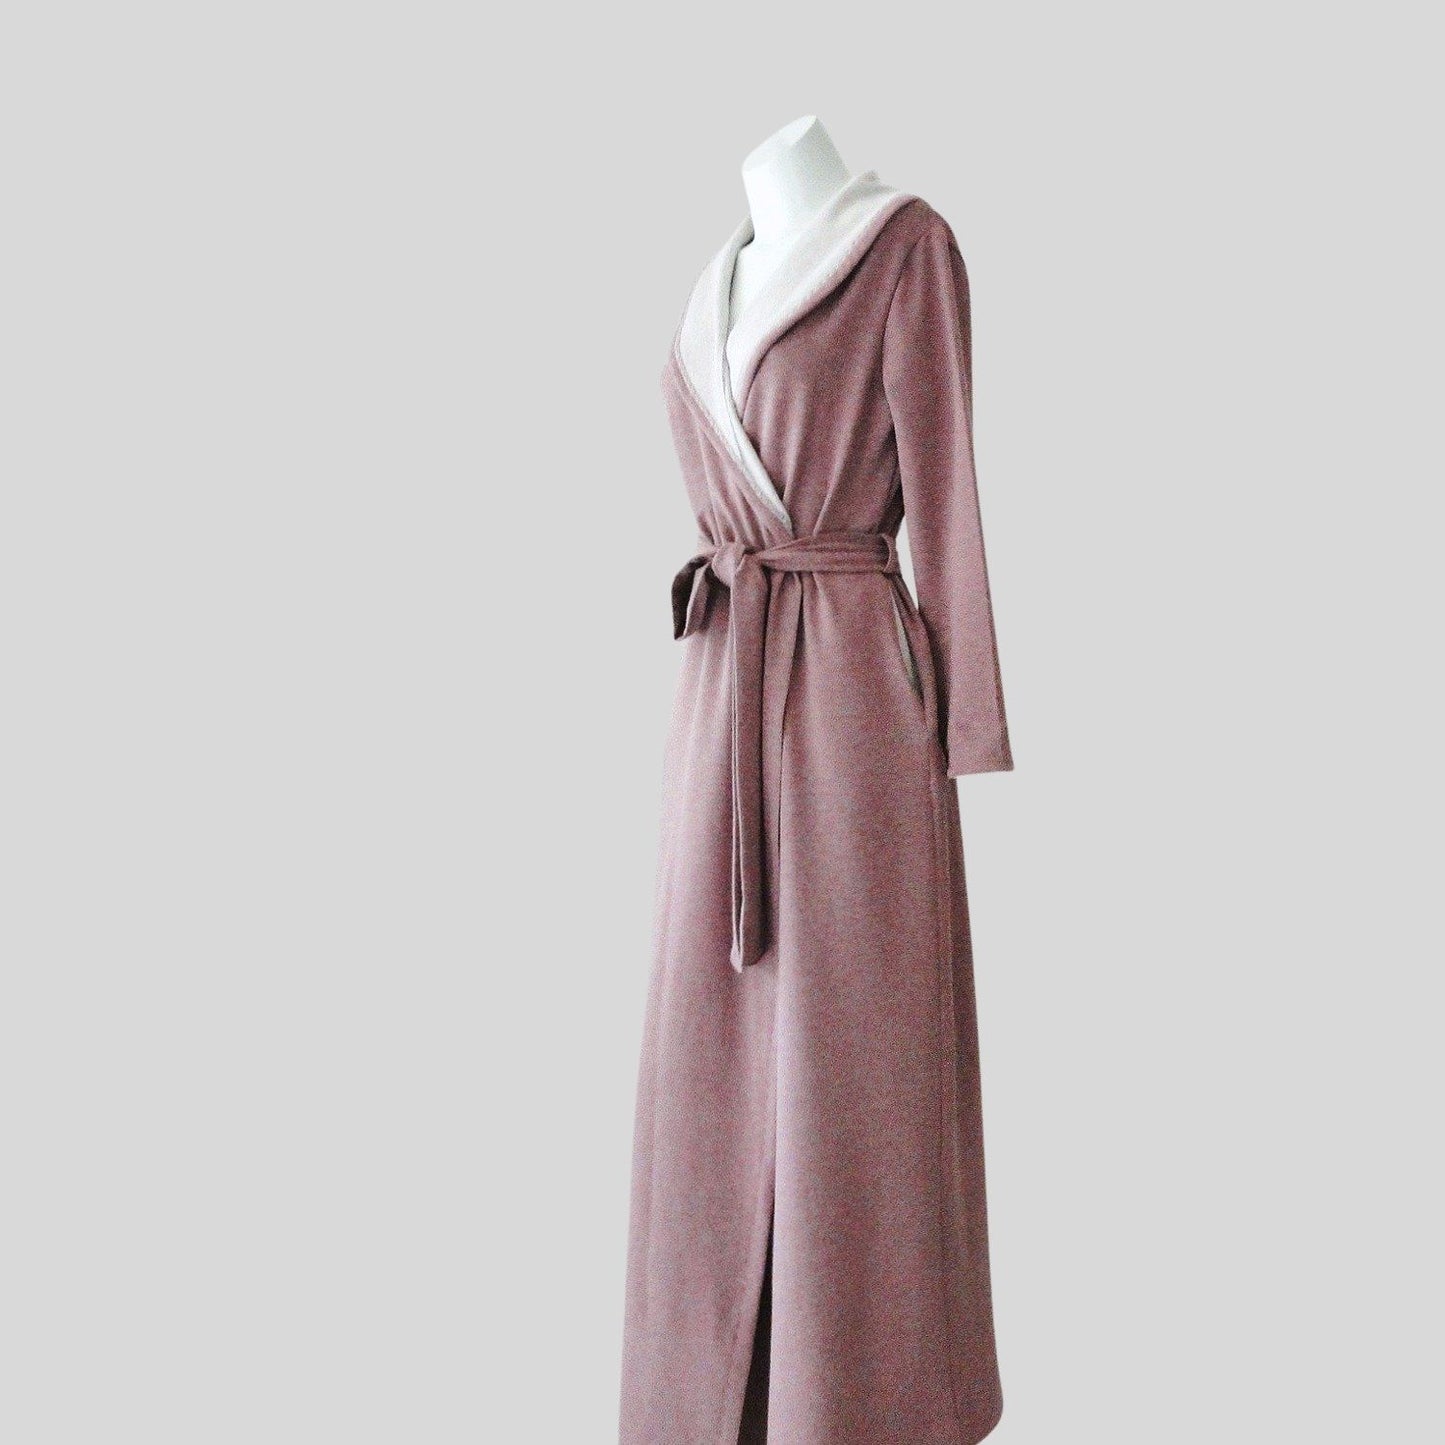 Dusty pink long bathrobe with pockets | Made in Canada